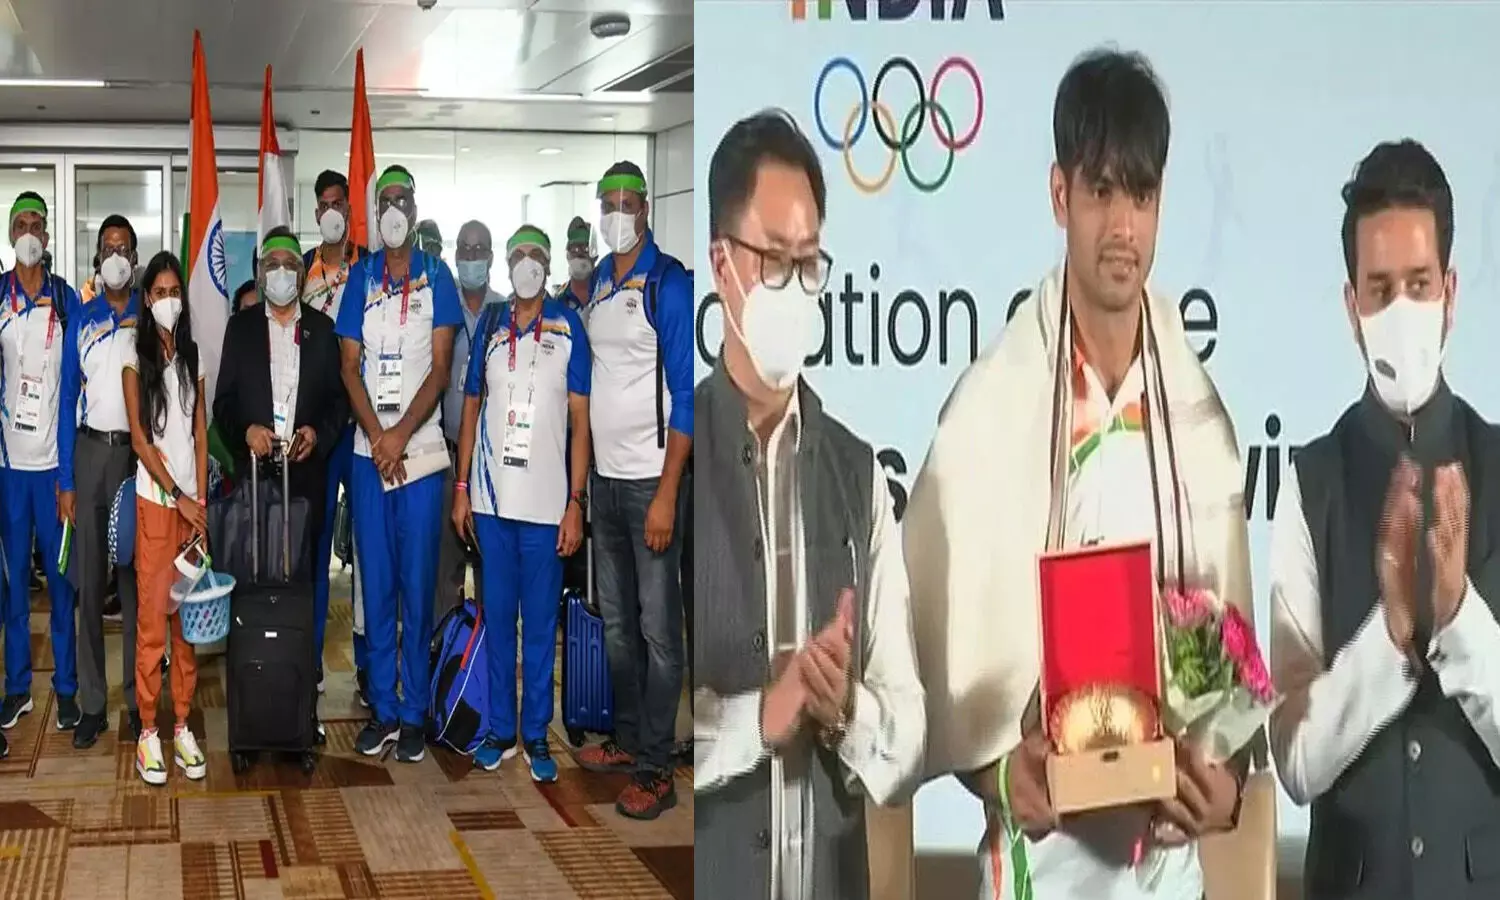 Welcome back Champions! Indian athletes return from the Tokyo Olympics